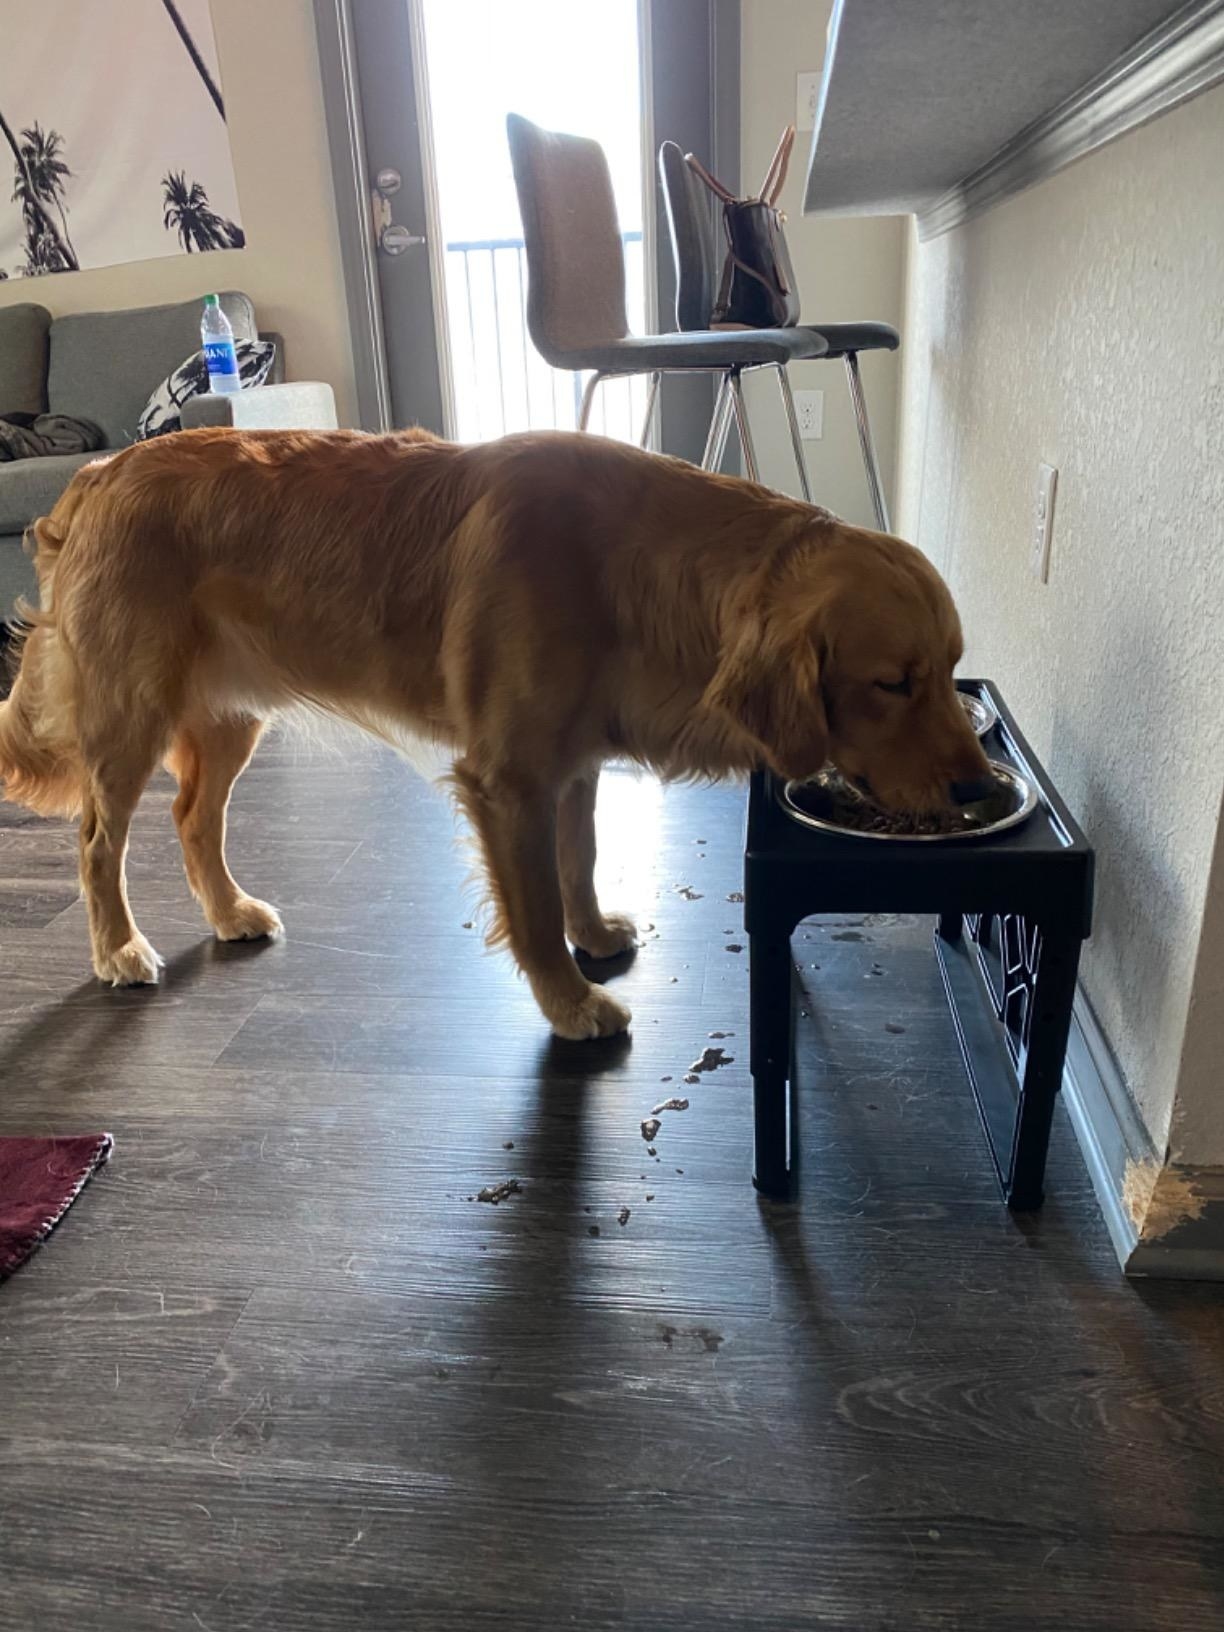 A golden retriever eating out of the elevated bowls, which are raised so it only has to bend very slightly to eat